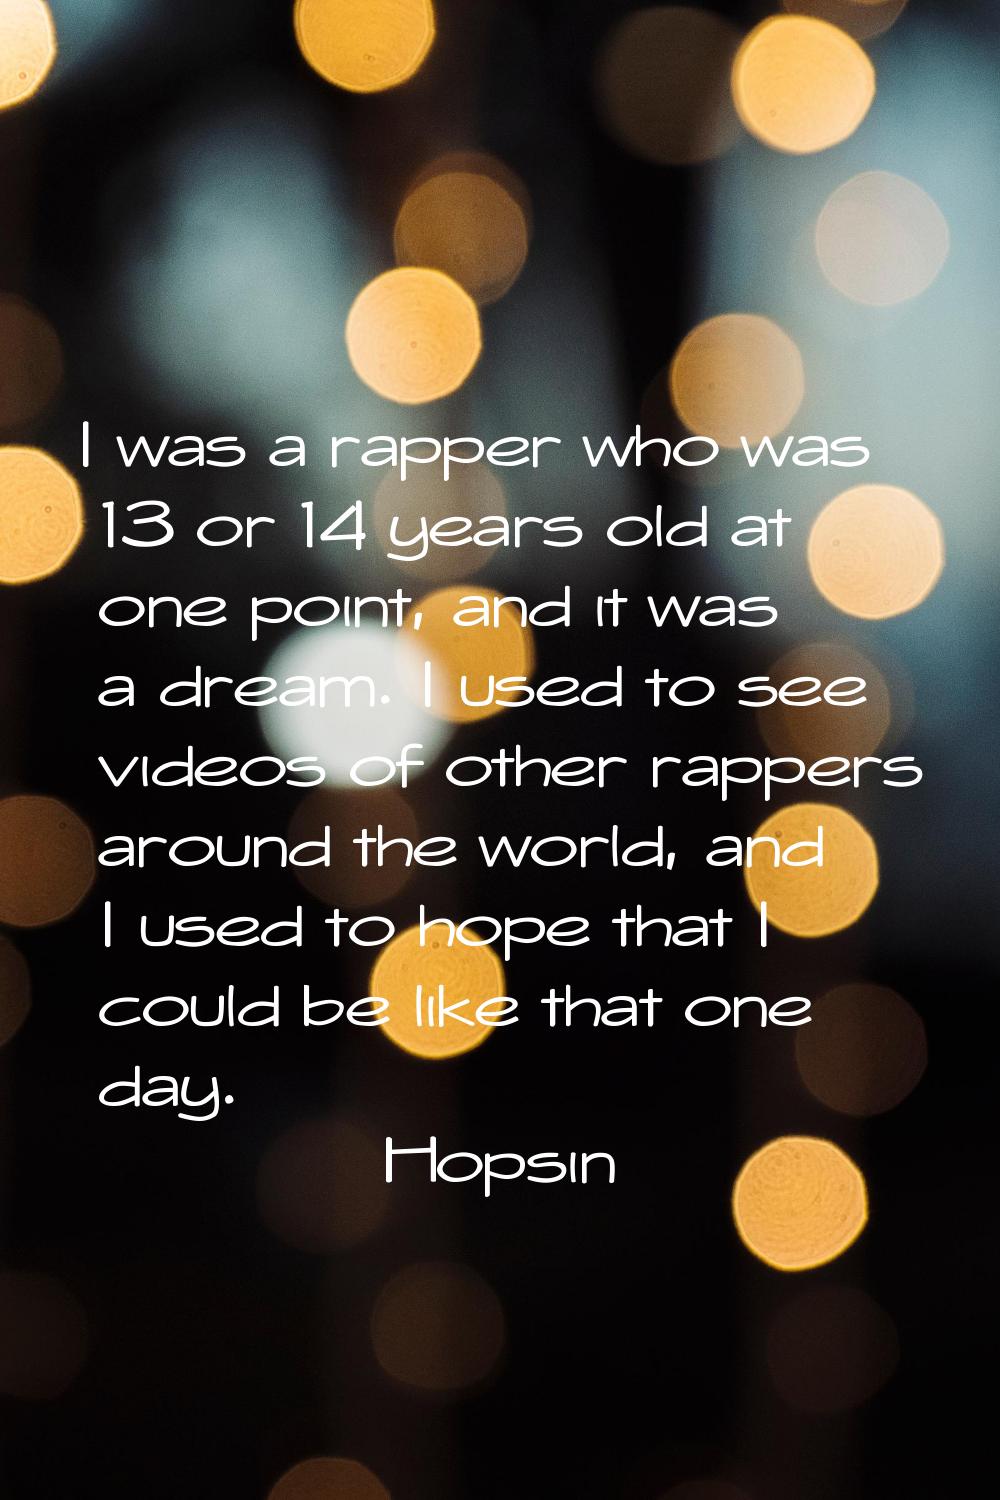 I was a rapper who was 13 or 14 years old at one point, and it was a dream. I used to see videos of